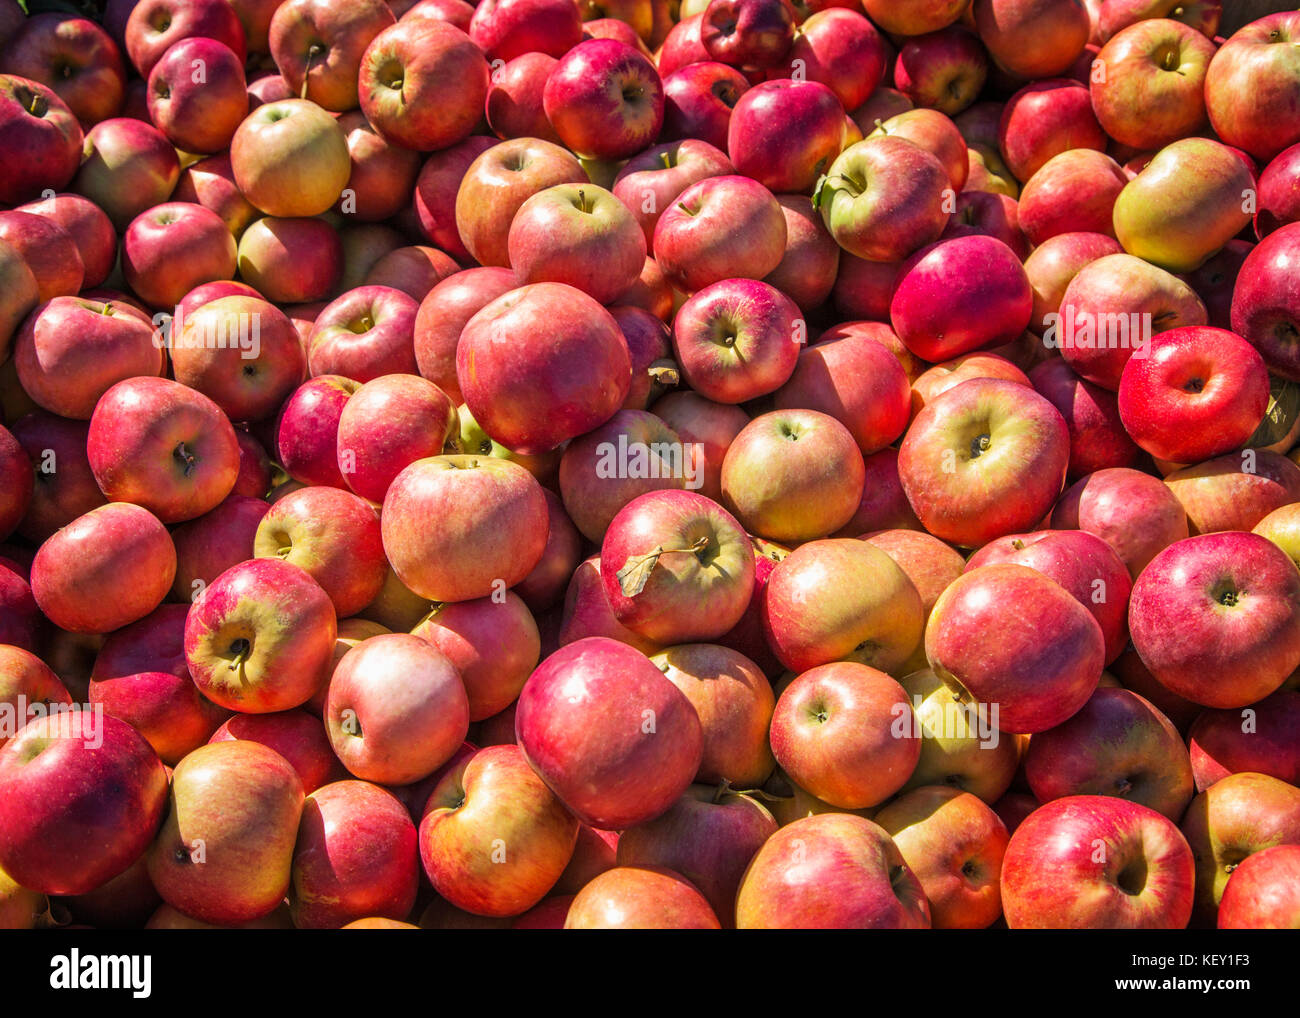 A close up view of many red apples Stock Photo